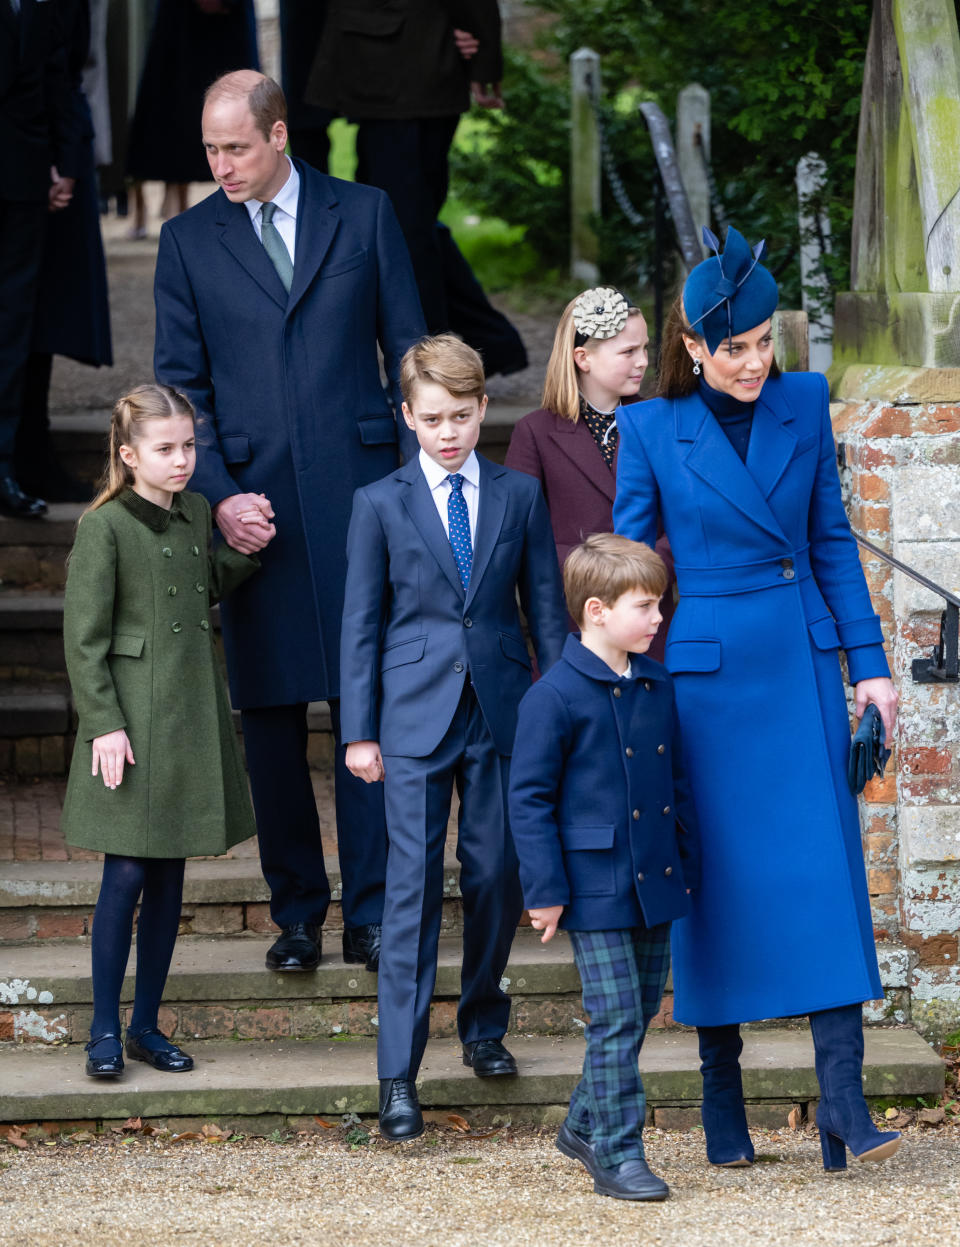 Kate Middleton, Princess of Wales, has announced that she has been diagnosed with cancer. (Getty Images)